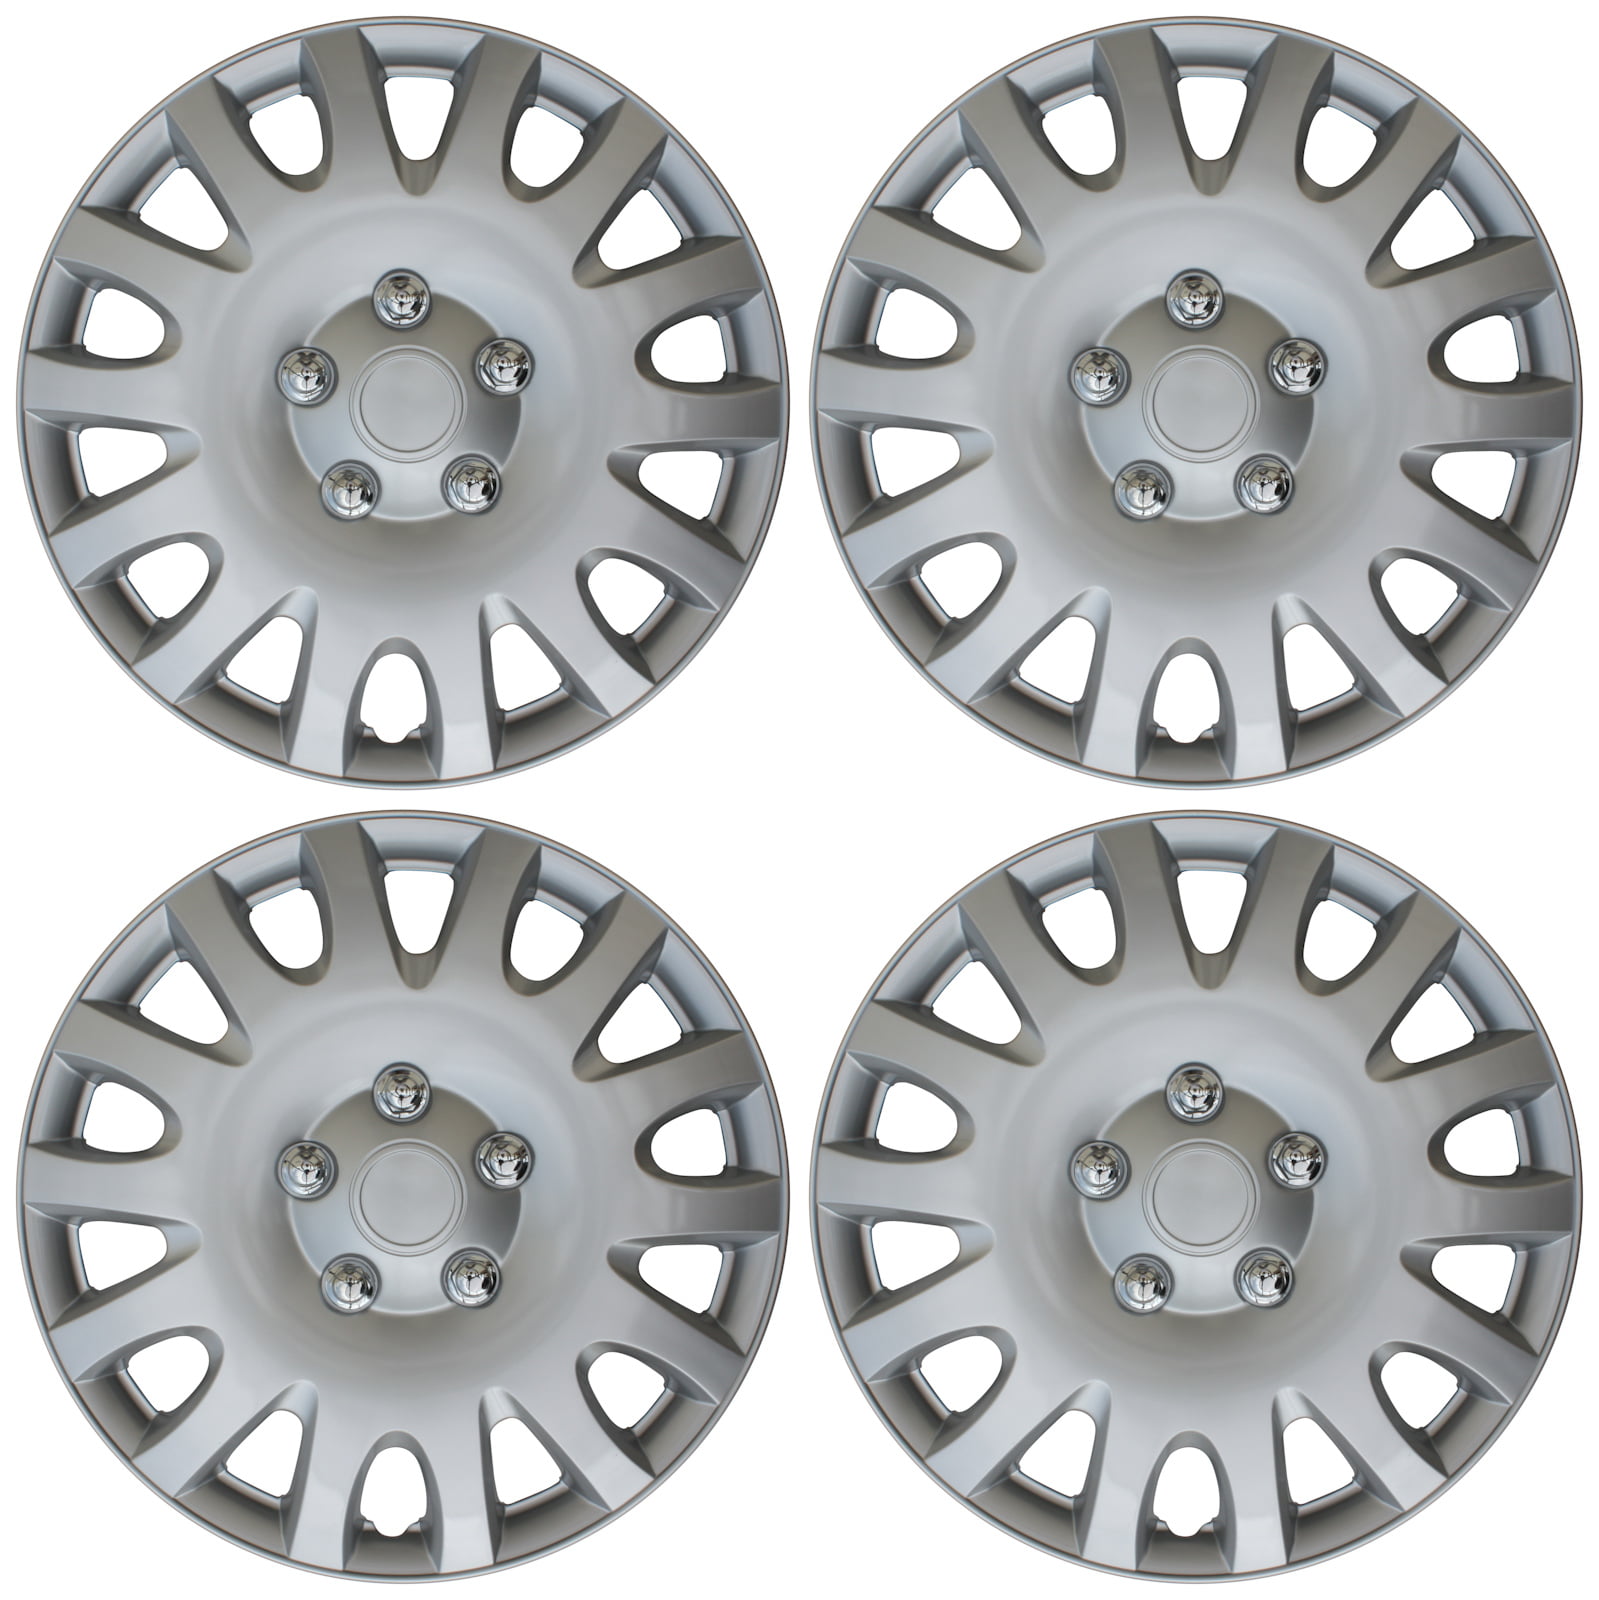 #026 Replacement 16" Inches Metallic Silver Hubcaps 4pcs Set Hub Cap Wheel Cover 